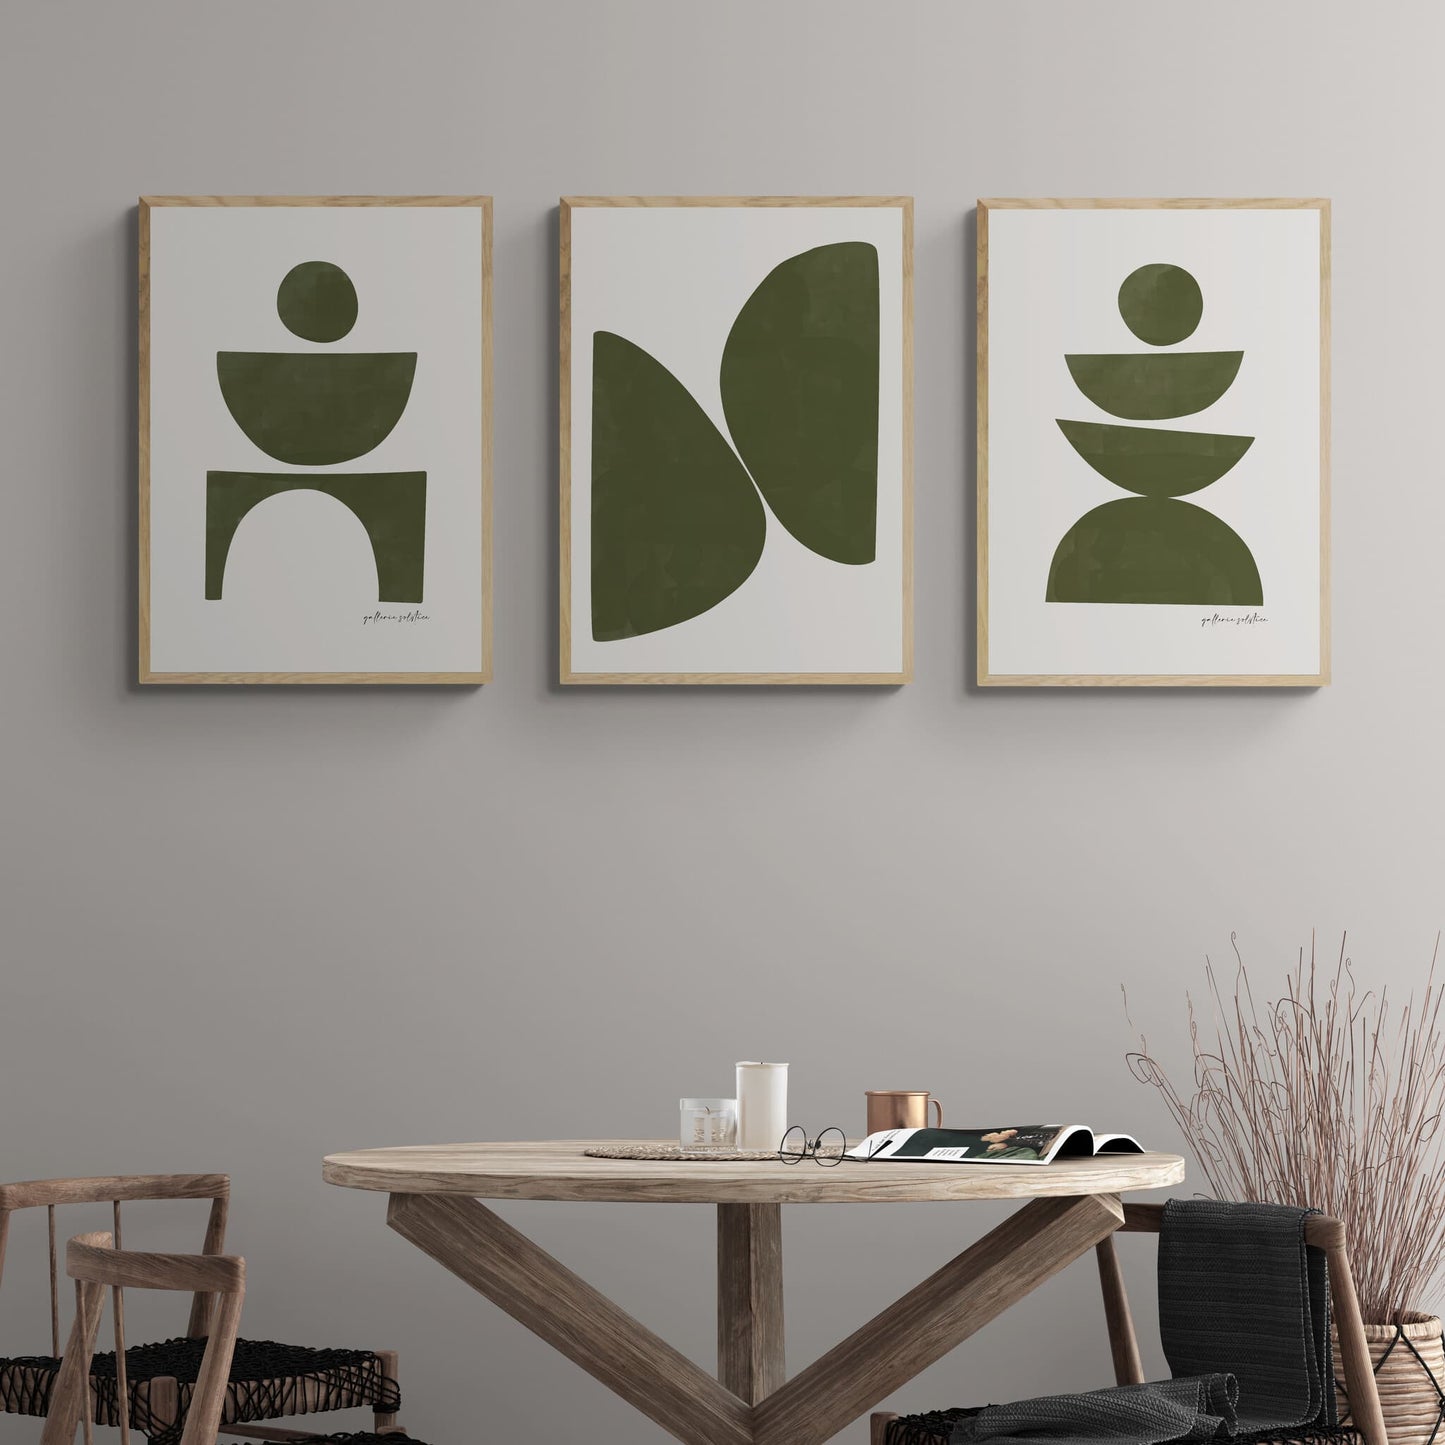 Group of three framed olive green abstract prints hanging above table